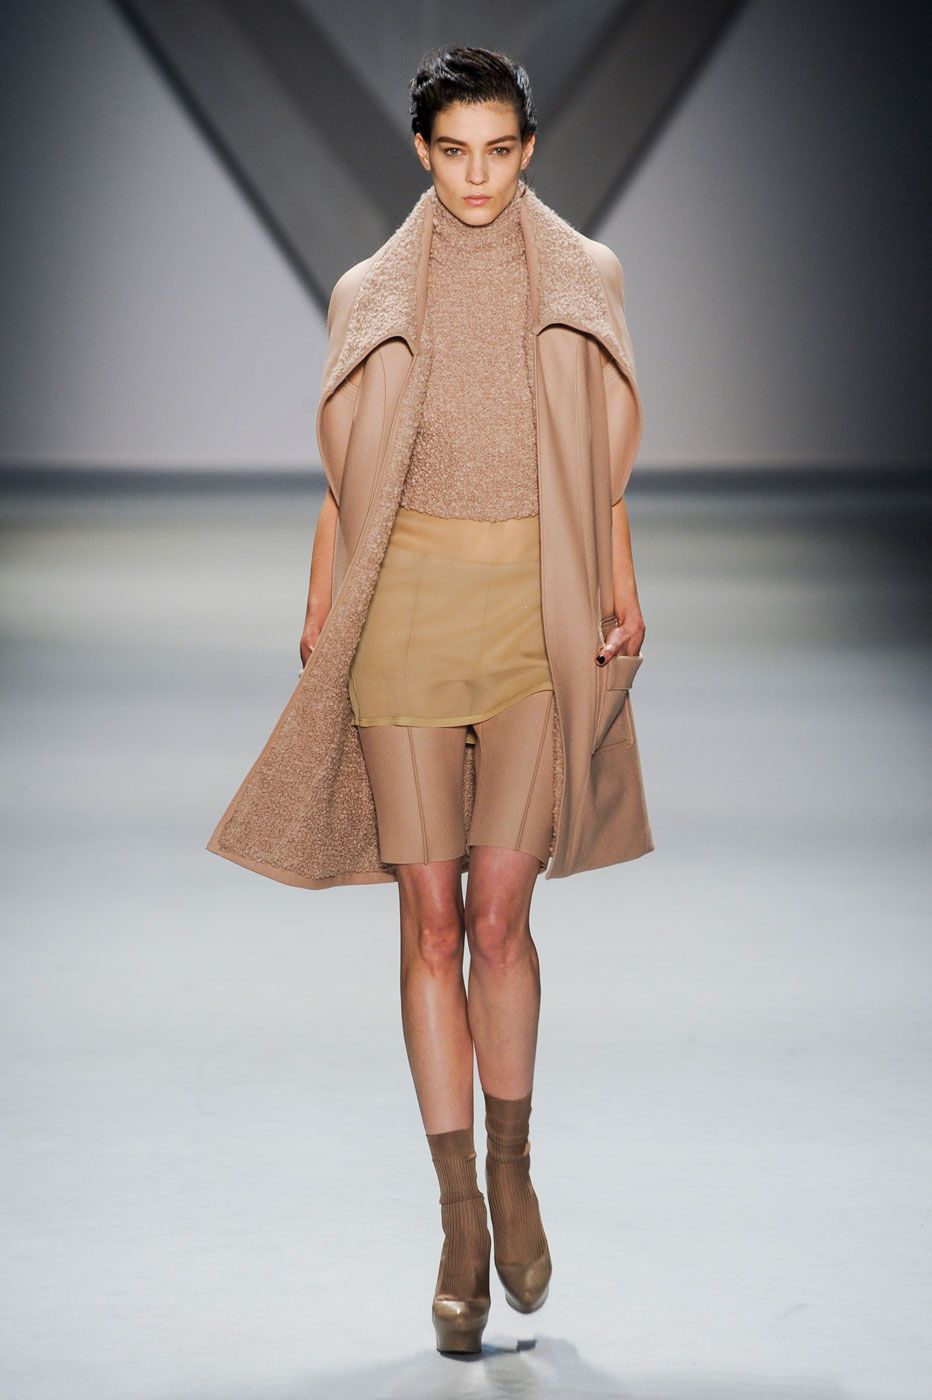 Clothing, Brown, Fashion show, Shoulder, Human leg, Joint, Outerwear, Runway, Style, Fashion model, 